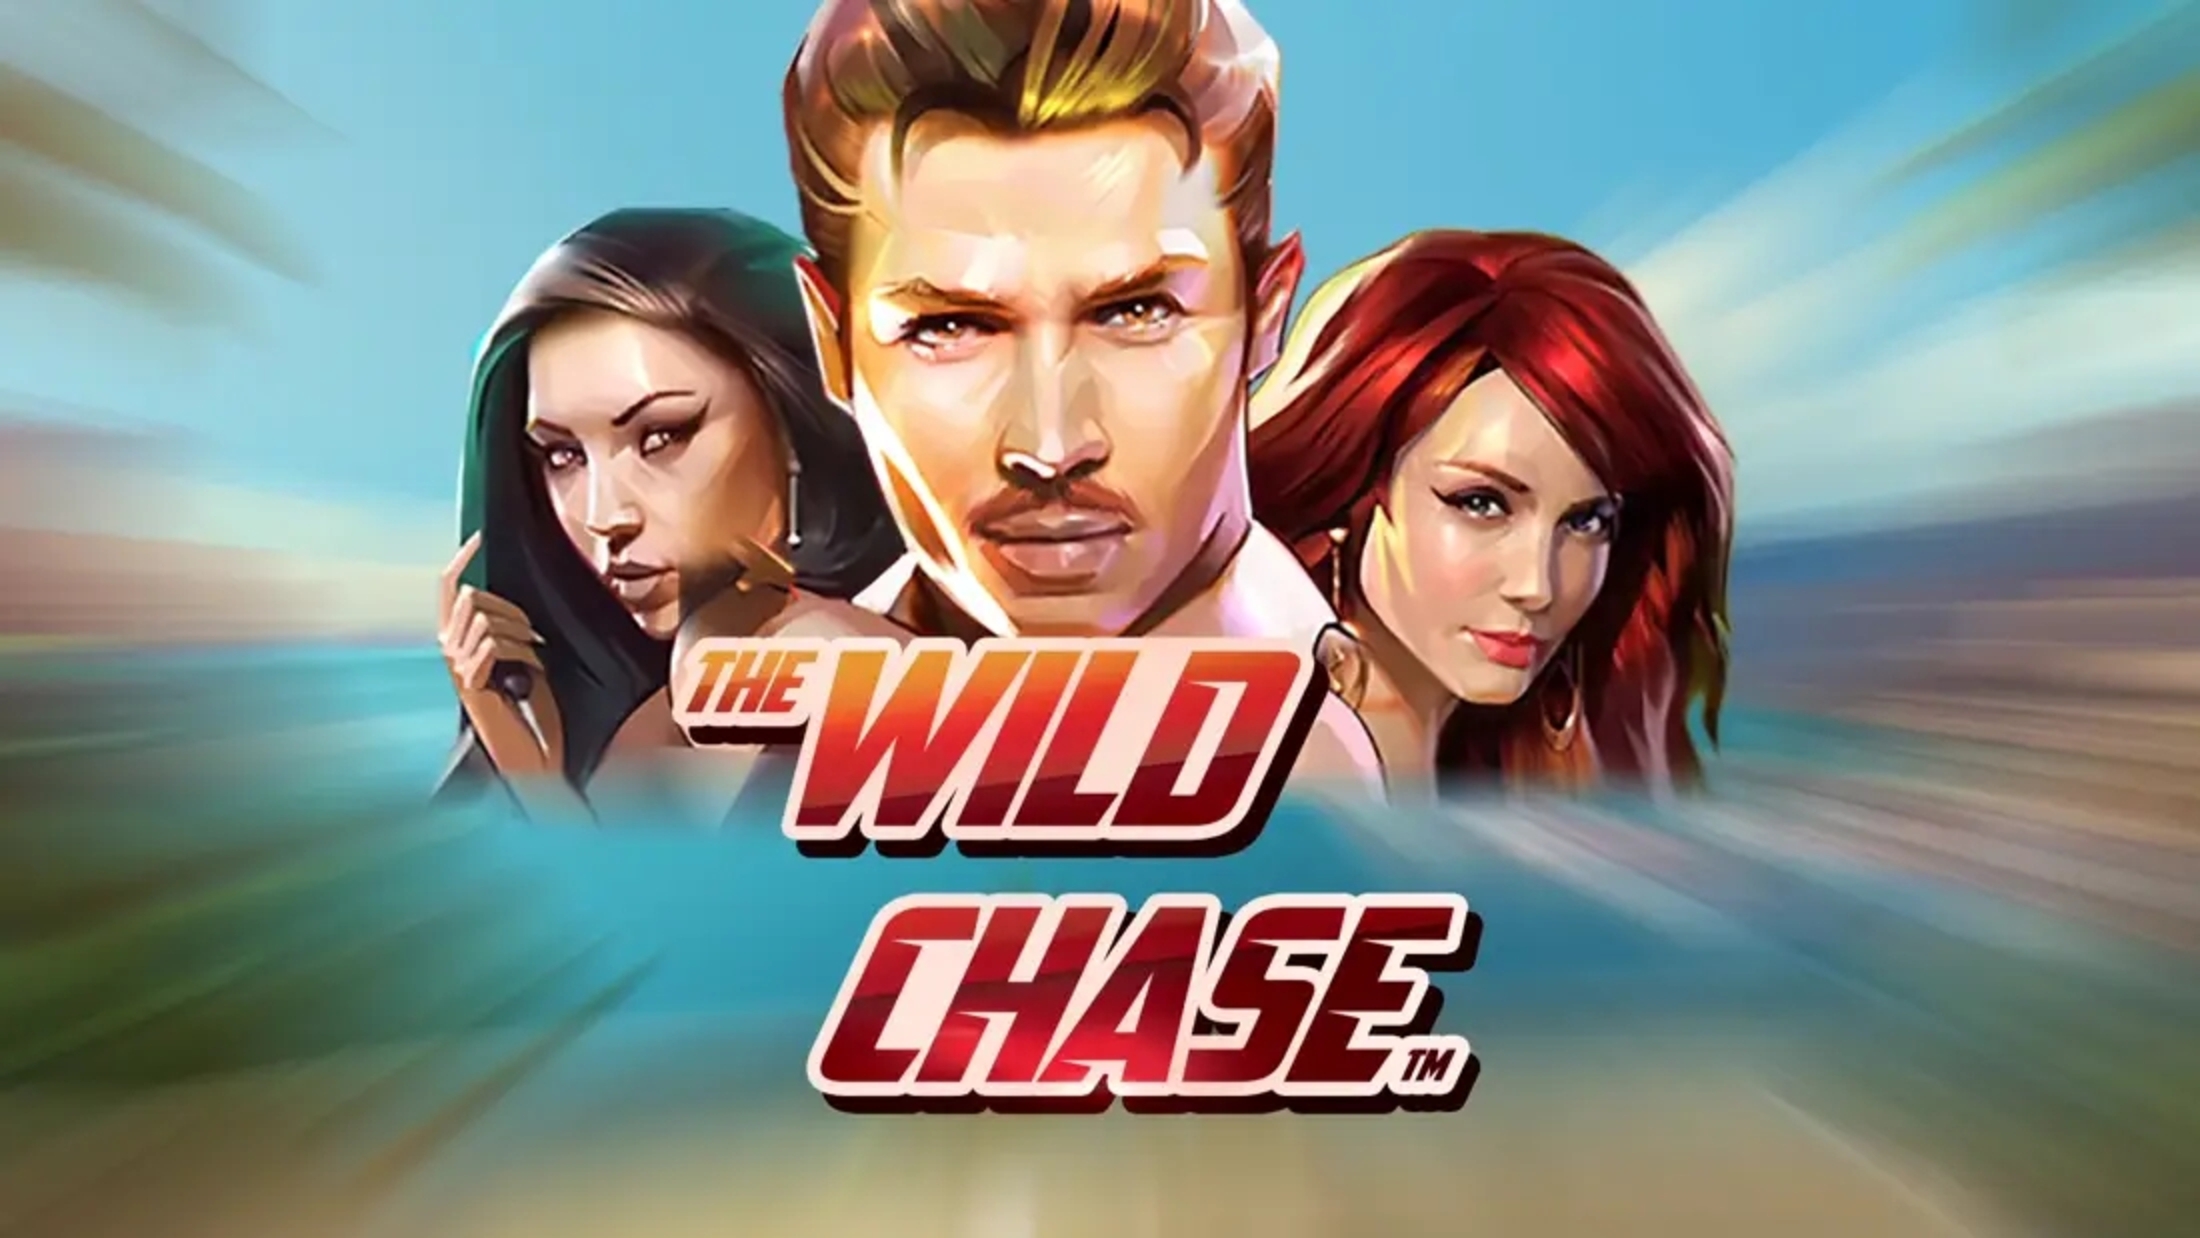 The Wild Chase demo